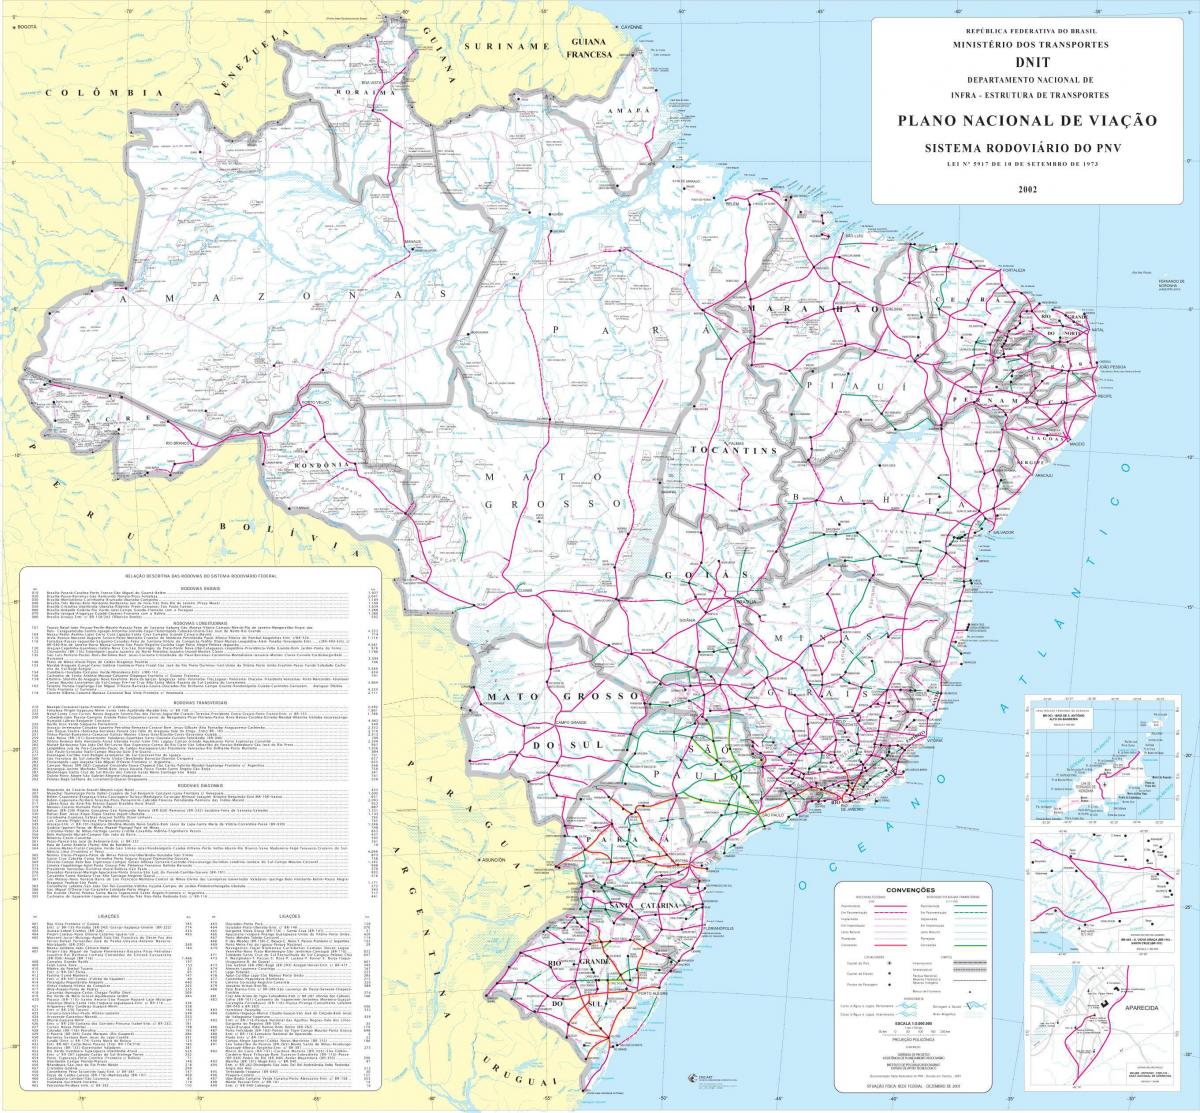 Driving map of Brazil